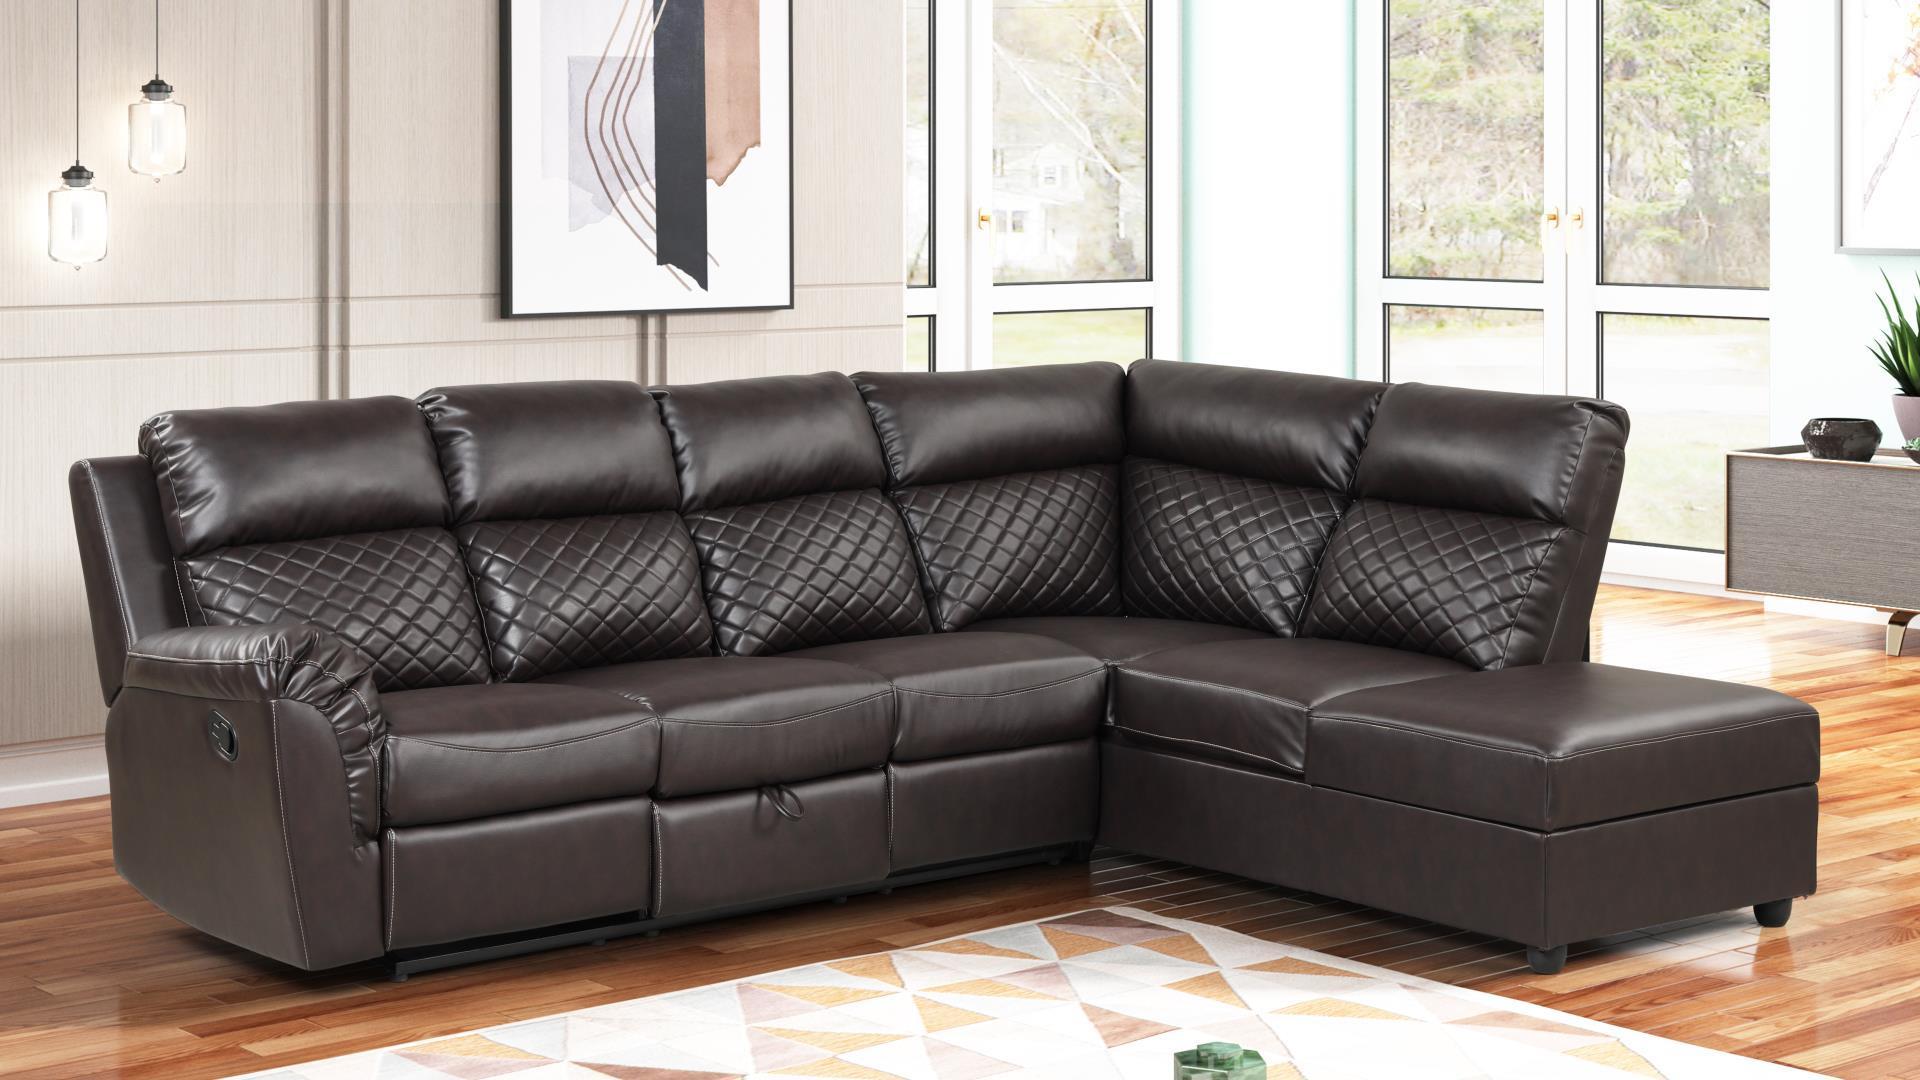 Contemporary, Modern Recliner Sectional CHARLOTTE CHARLOTTE-BR in Brown Eco Leather